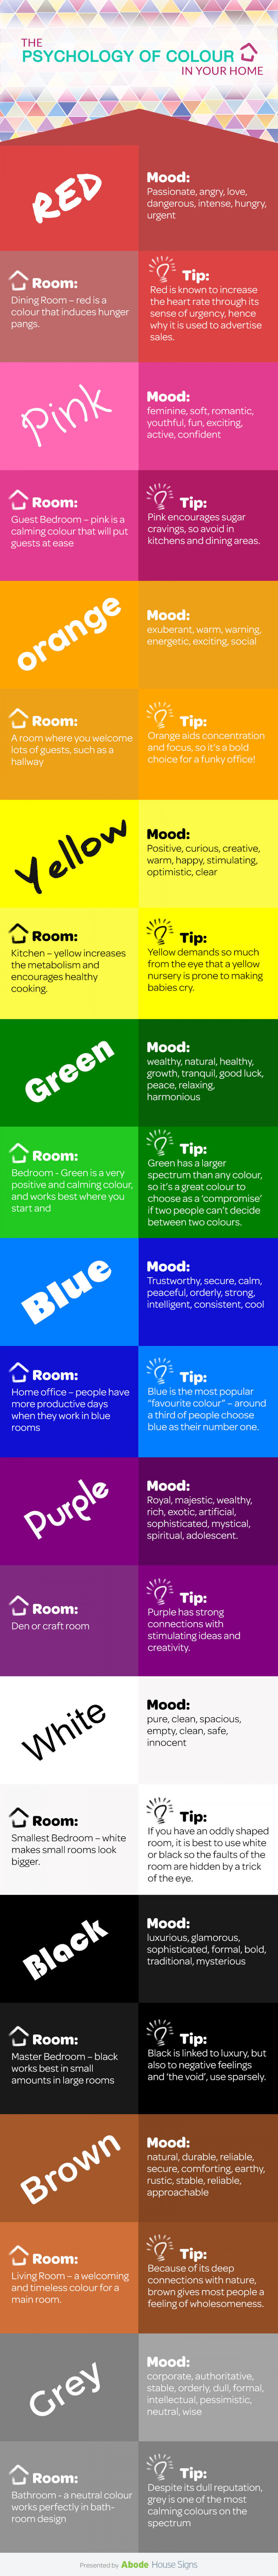 The Psychology of Colour in Your Home Infographic